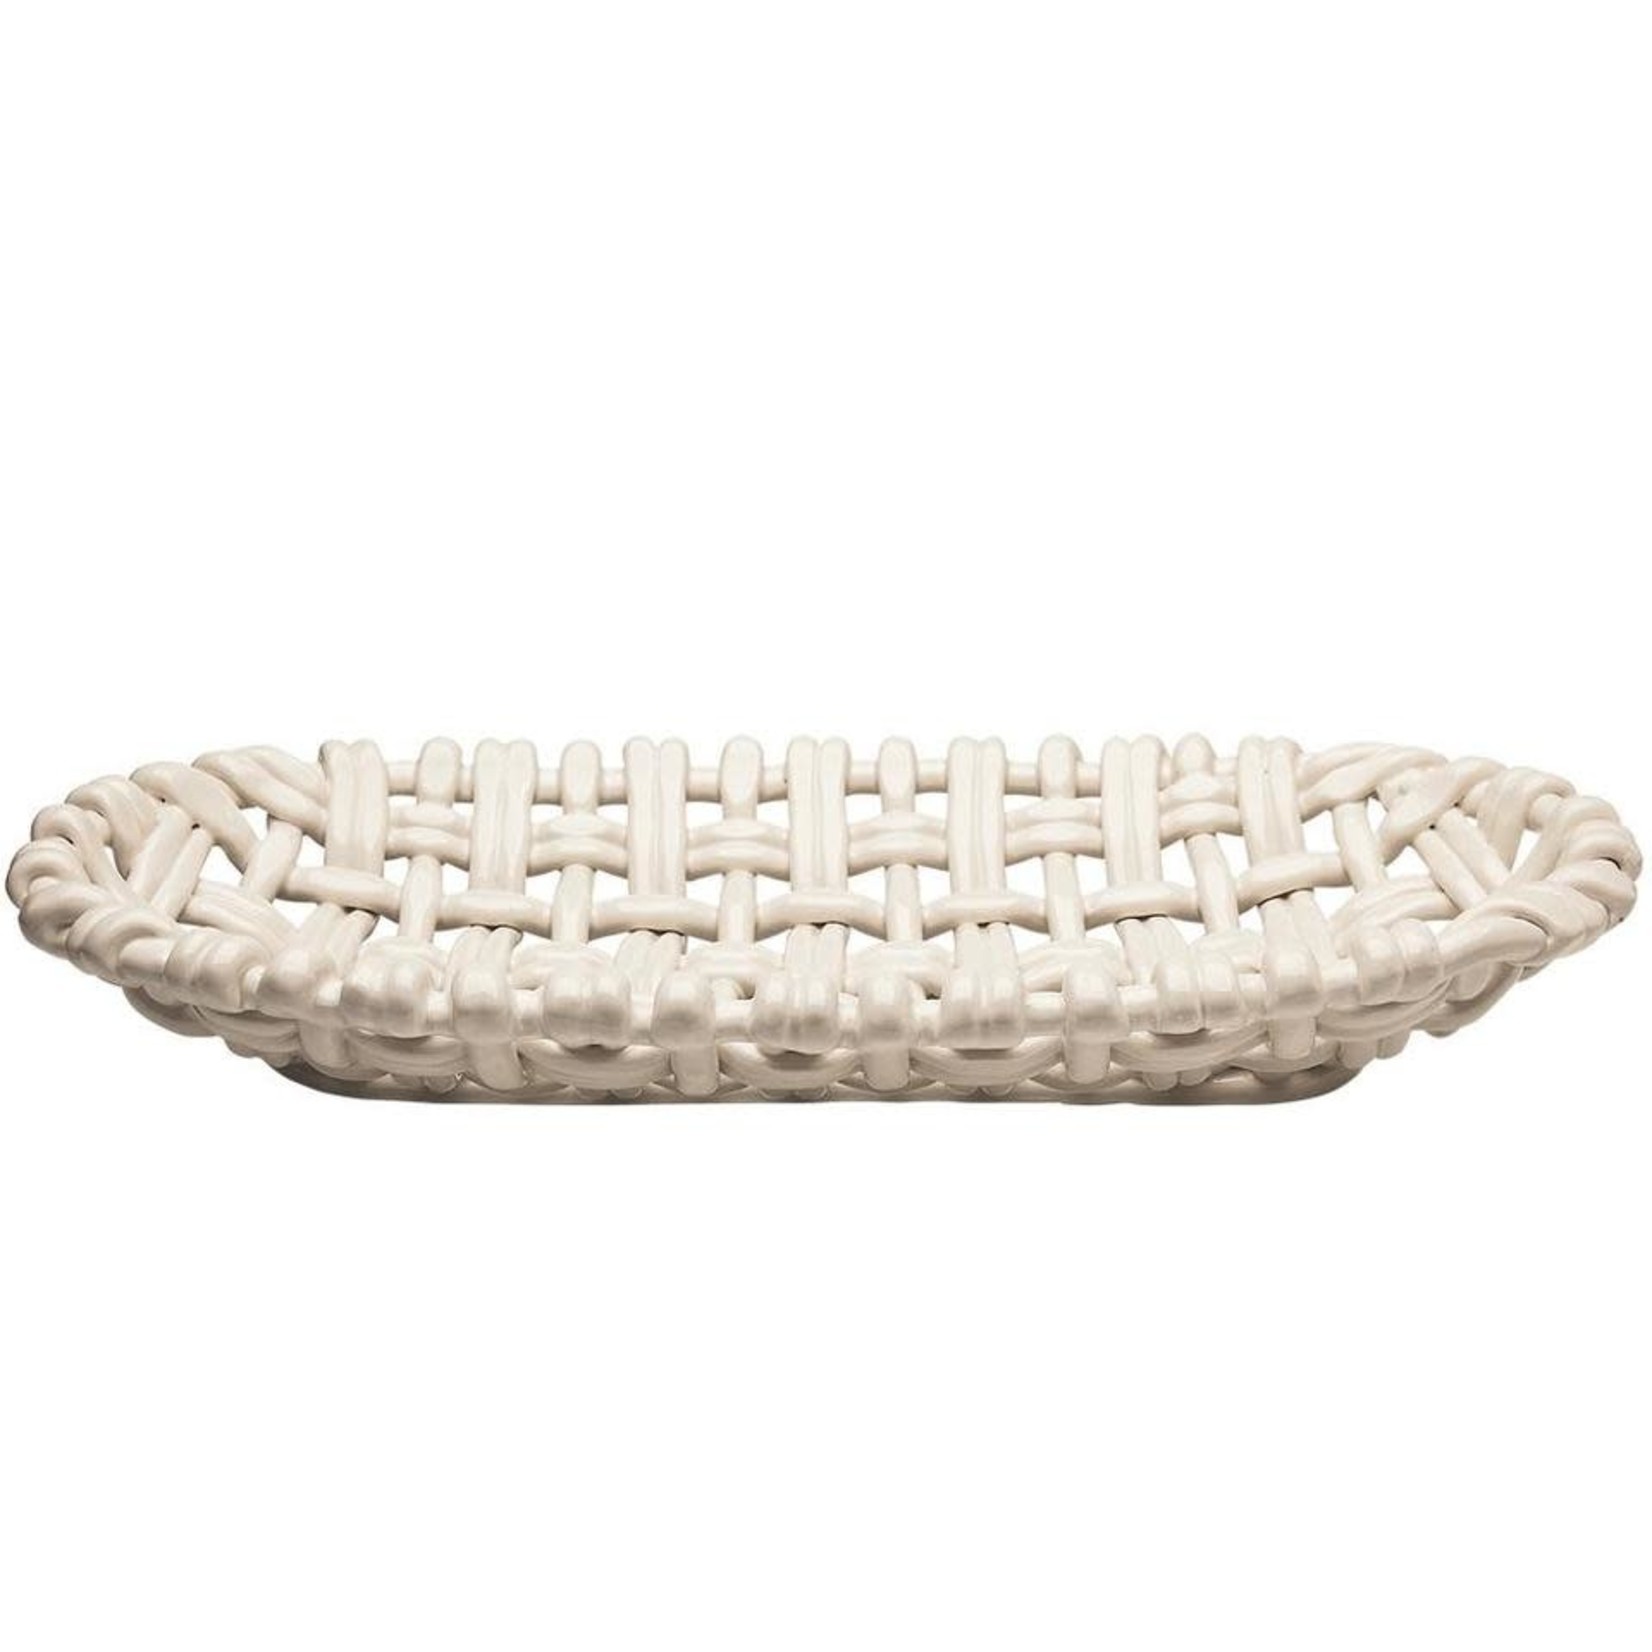 Skyros Designs Hand Woven Oval Basket - Ivory